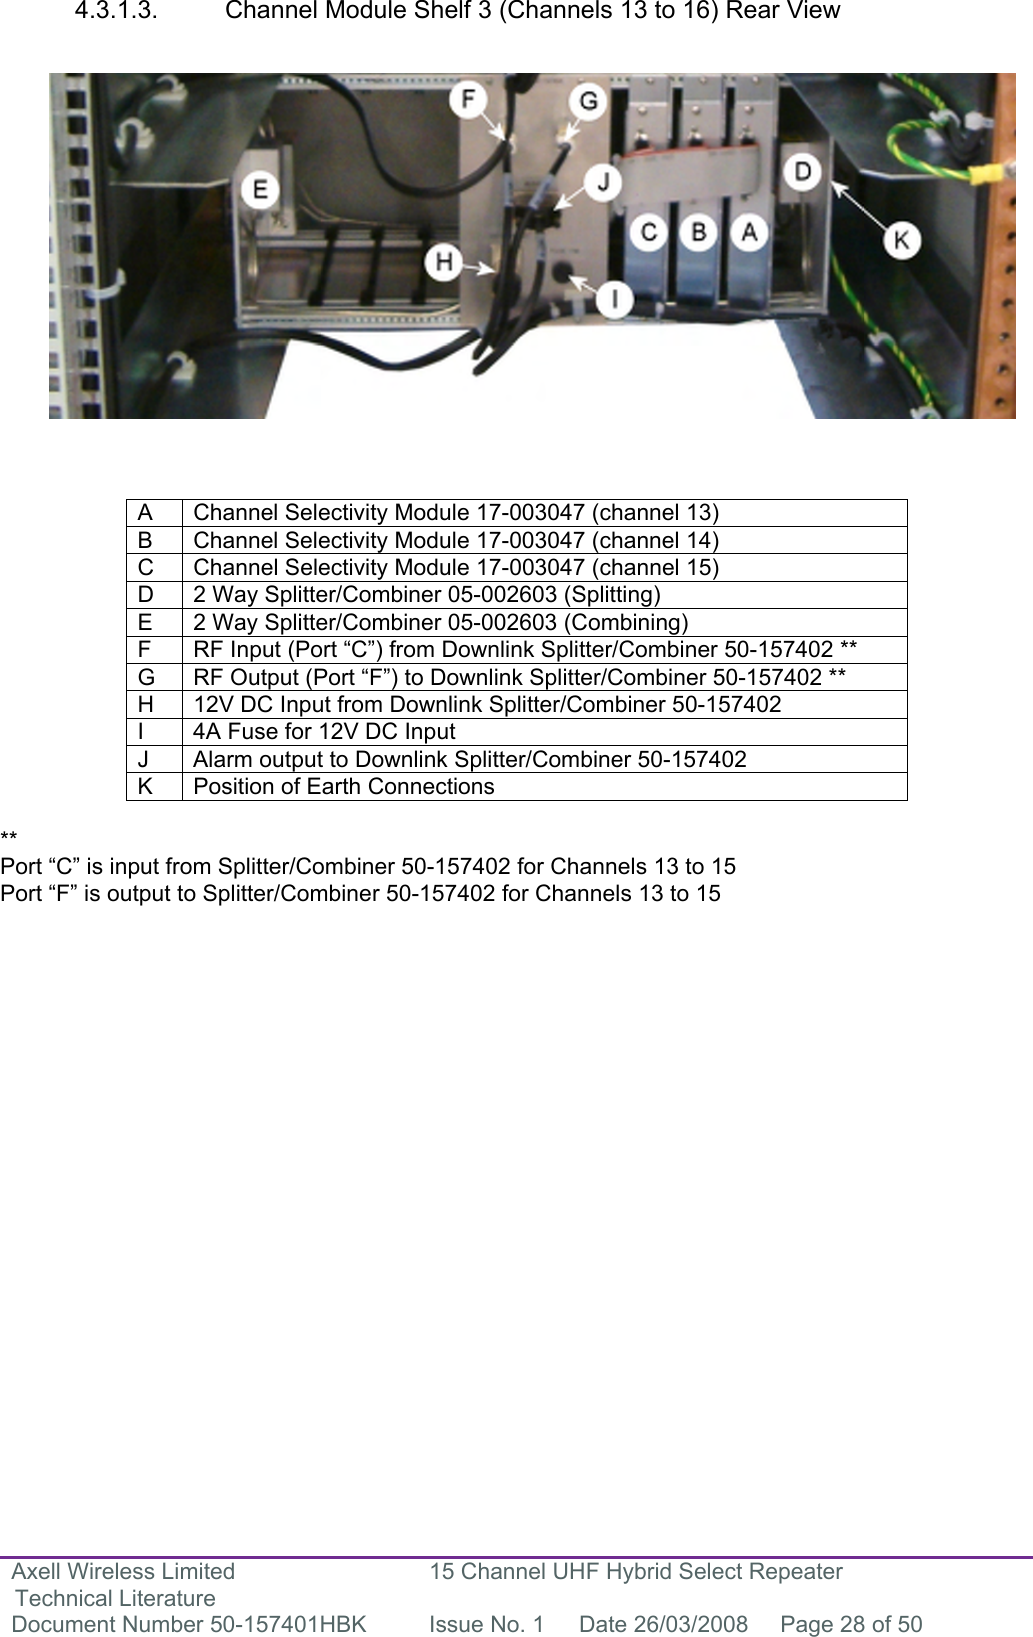 Axell Wireless Limited Technical Literature 15 Channel UHF Hybrid Select Repeater Document Number 50-157401HBK  Issue No. 1  Date 26/03/2008  Page 28 of 50   4.3.1.3.  Channel Module Shelf 3 (Channels 13 to 16) Rear View                   A  Channel Selectivity Module 17-003047 (channel 13) B  Channel Selectivity Module 17-003047 (channel 14) C  Channel Selectivity Module 17-003047 (channel 15) D  2 Way Splitter/Combiner 05-002603 (Splitting) E  2 Way Splitter/Combiner 05-002603 (Combining) F  RF Input (Port “C”) from Downlink Splitter/Combiner 50-157402 ** G  RF Output (Port “F”) to Downlink Splitter/Combiner 50-157402 ** H  12V DC Input from Downlink Splitter/Combiner 50-157402 I  4A Fuse for 12V DC Input J  Alarm output to Downlink Splitter/Combiner 50-157402 K  Position of Earth Connections  **  Port “C” is input from Splitter/Combiner 50-157402 for Channels 13 to 15 Port “F” is output to Splitter/Combiner 50-157402 for Channels 13 to 15                  